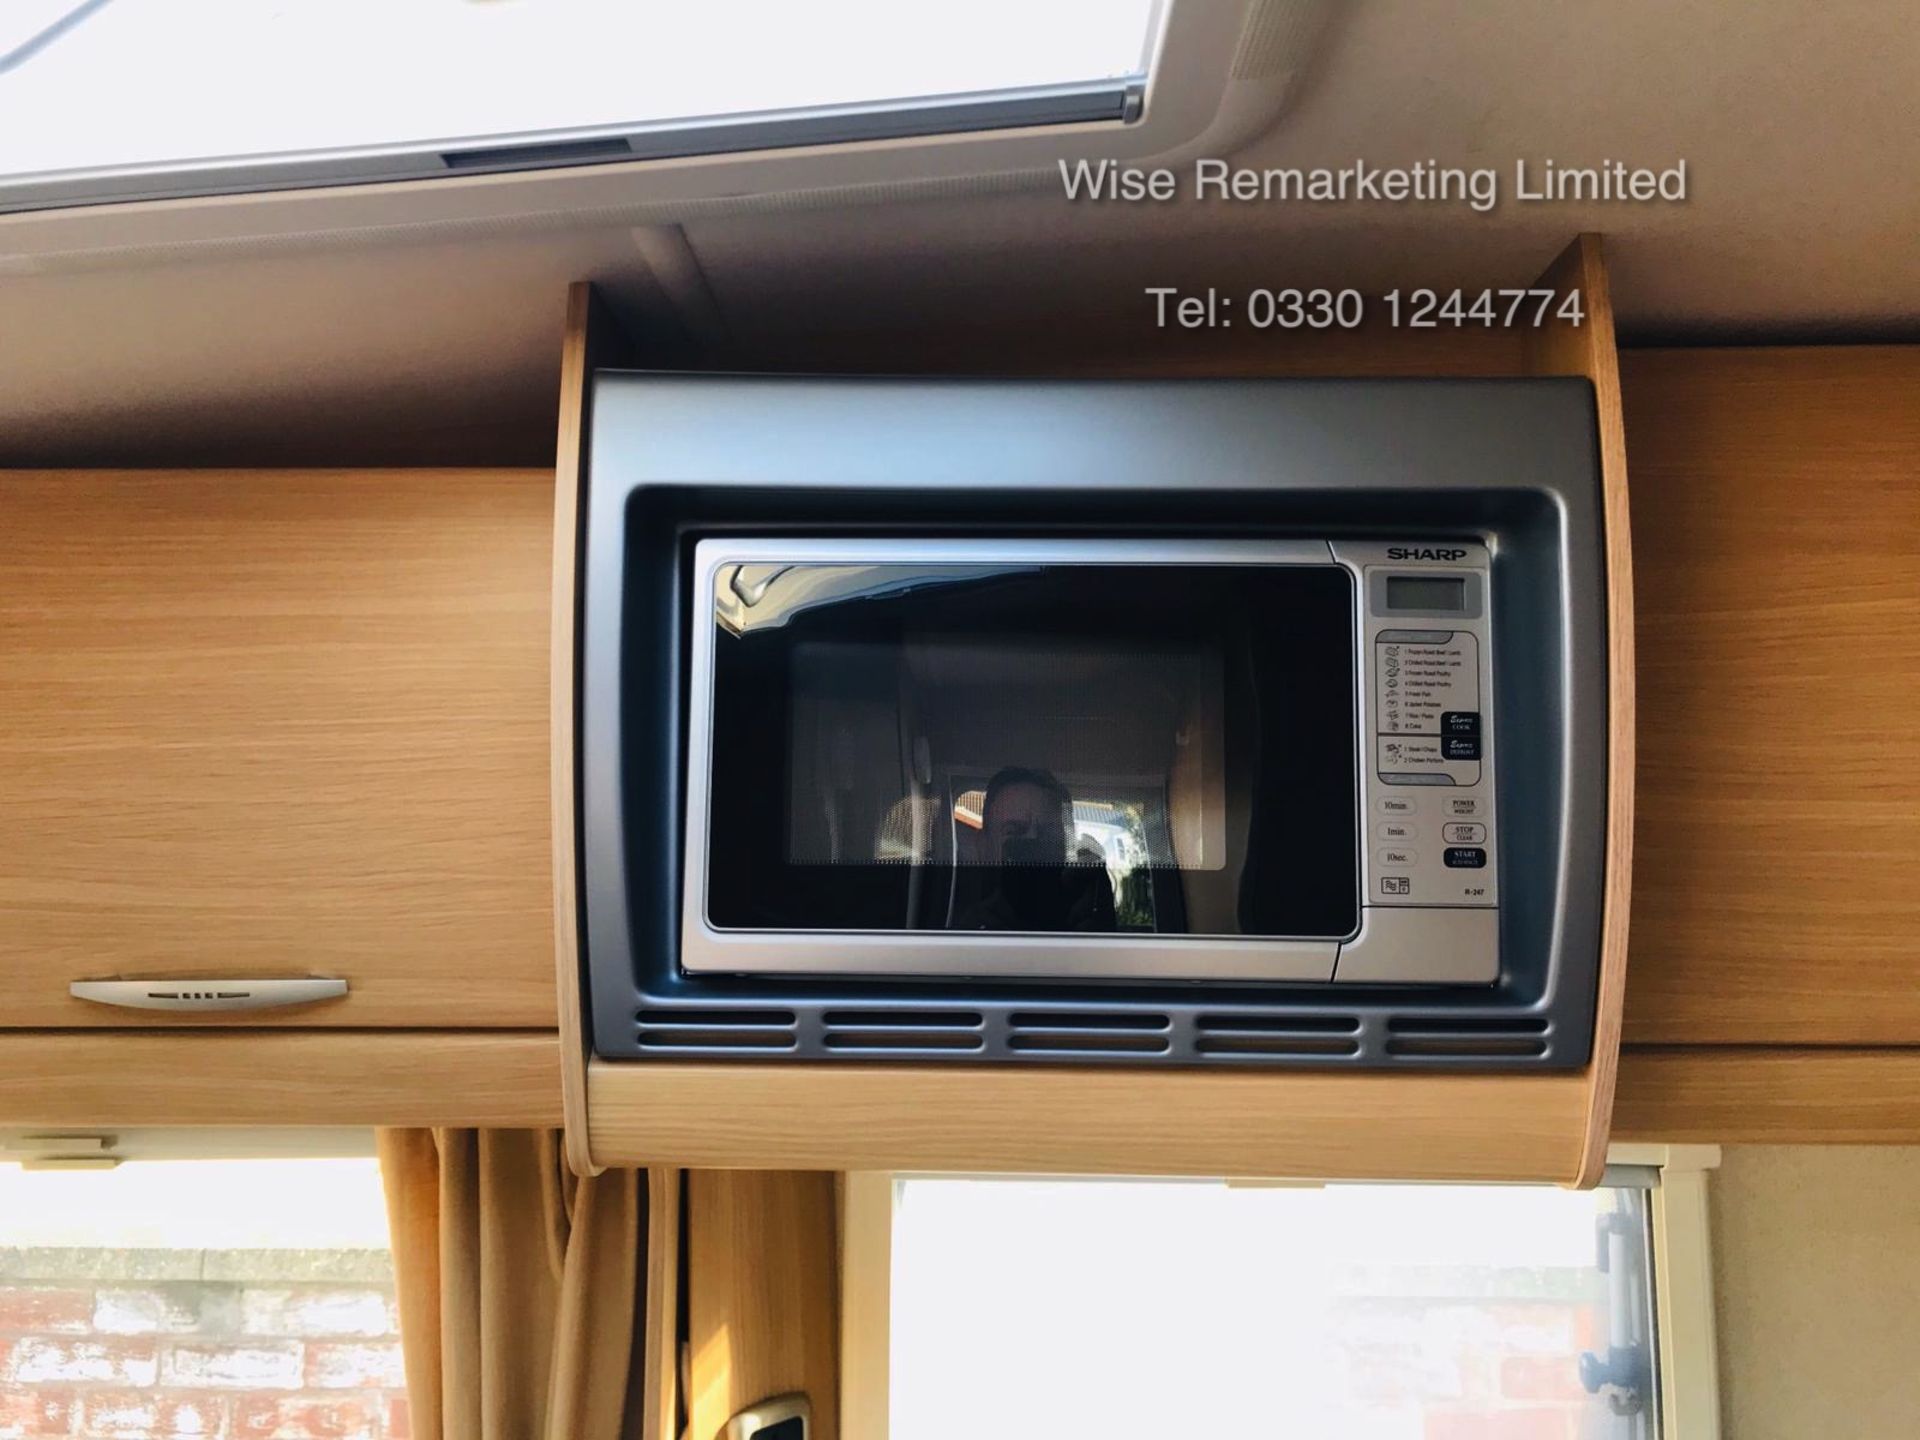 (RESERVE MET) Swift Abbey Freestyle 480 (4 Berth) Caravan - 2008 Model - 1 Former Keeper From New - Image 20 of 32